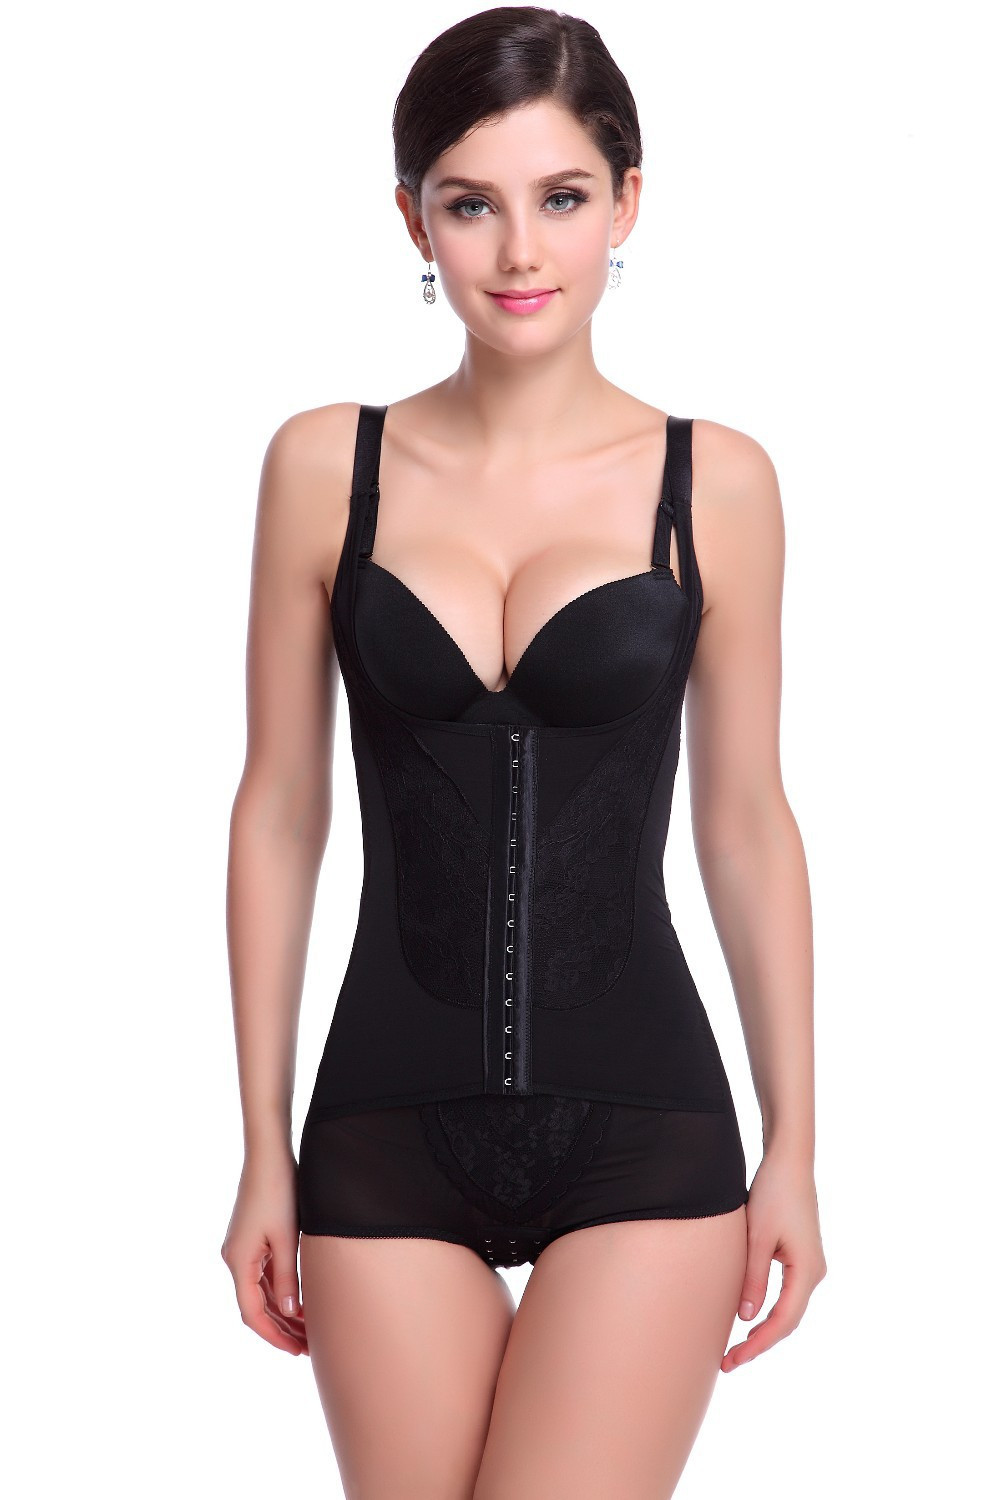 Top Brand Hot Sell Intimates Best Full Body Corset Shaper